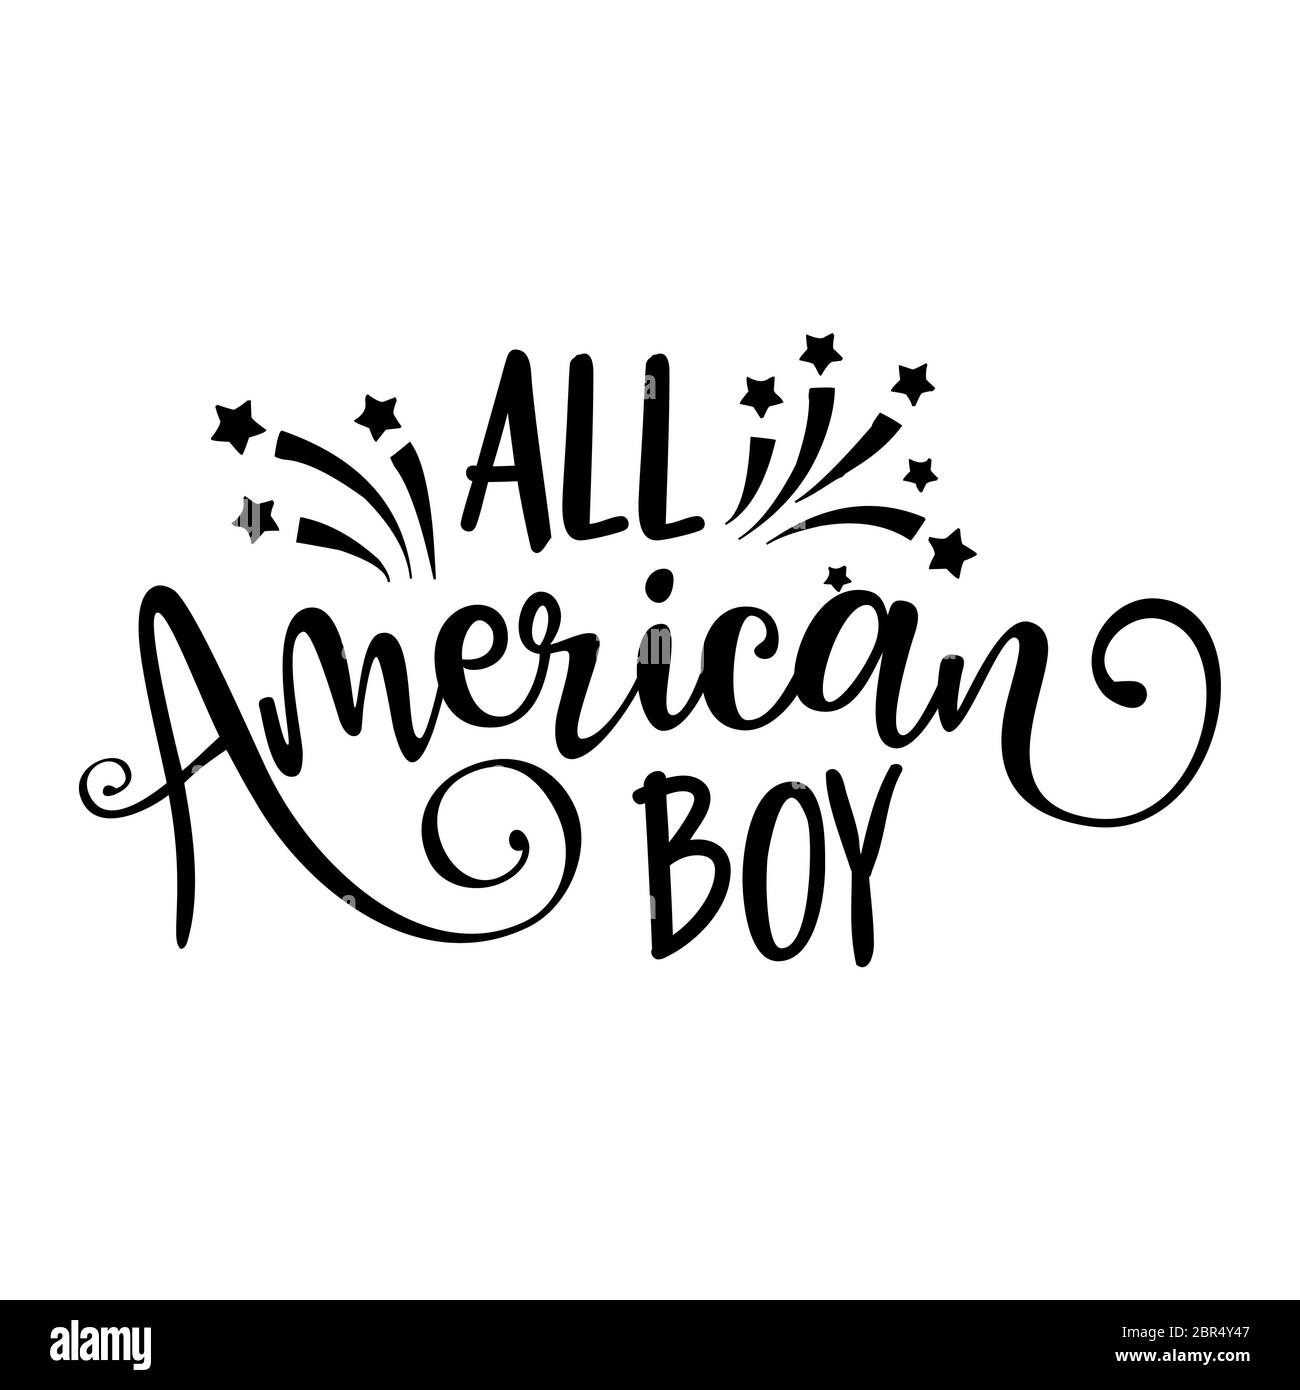 All american boy - Happy Independence Day July 4 lettering design illustration. Good for advertising, poster, announcement, invitation, party, greetin Stock Vector